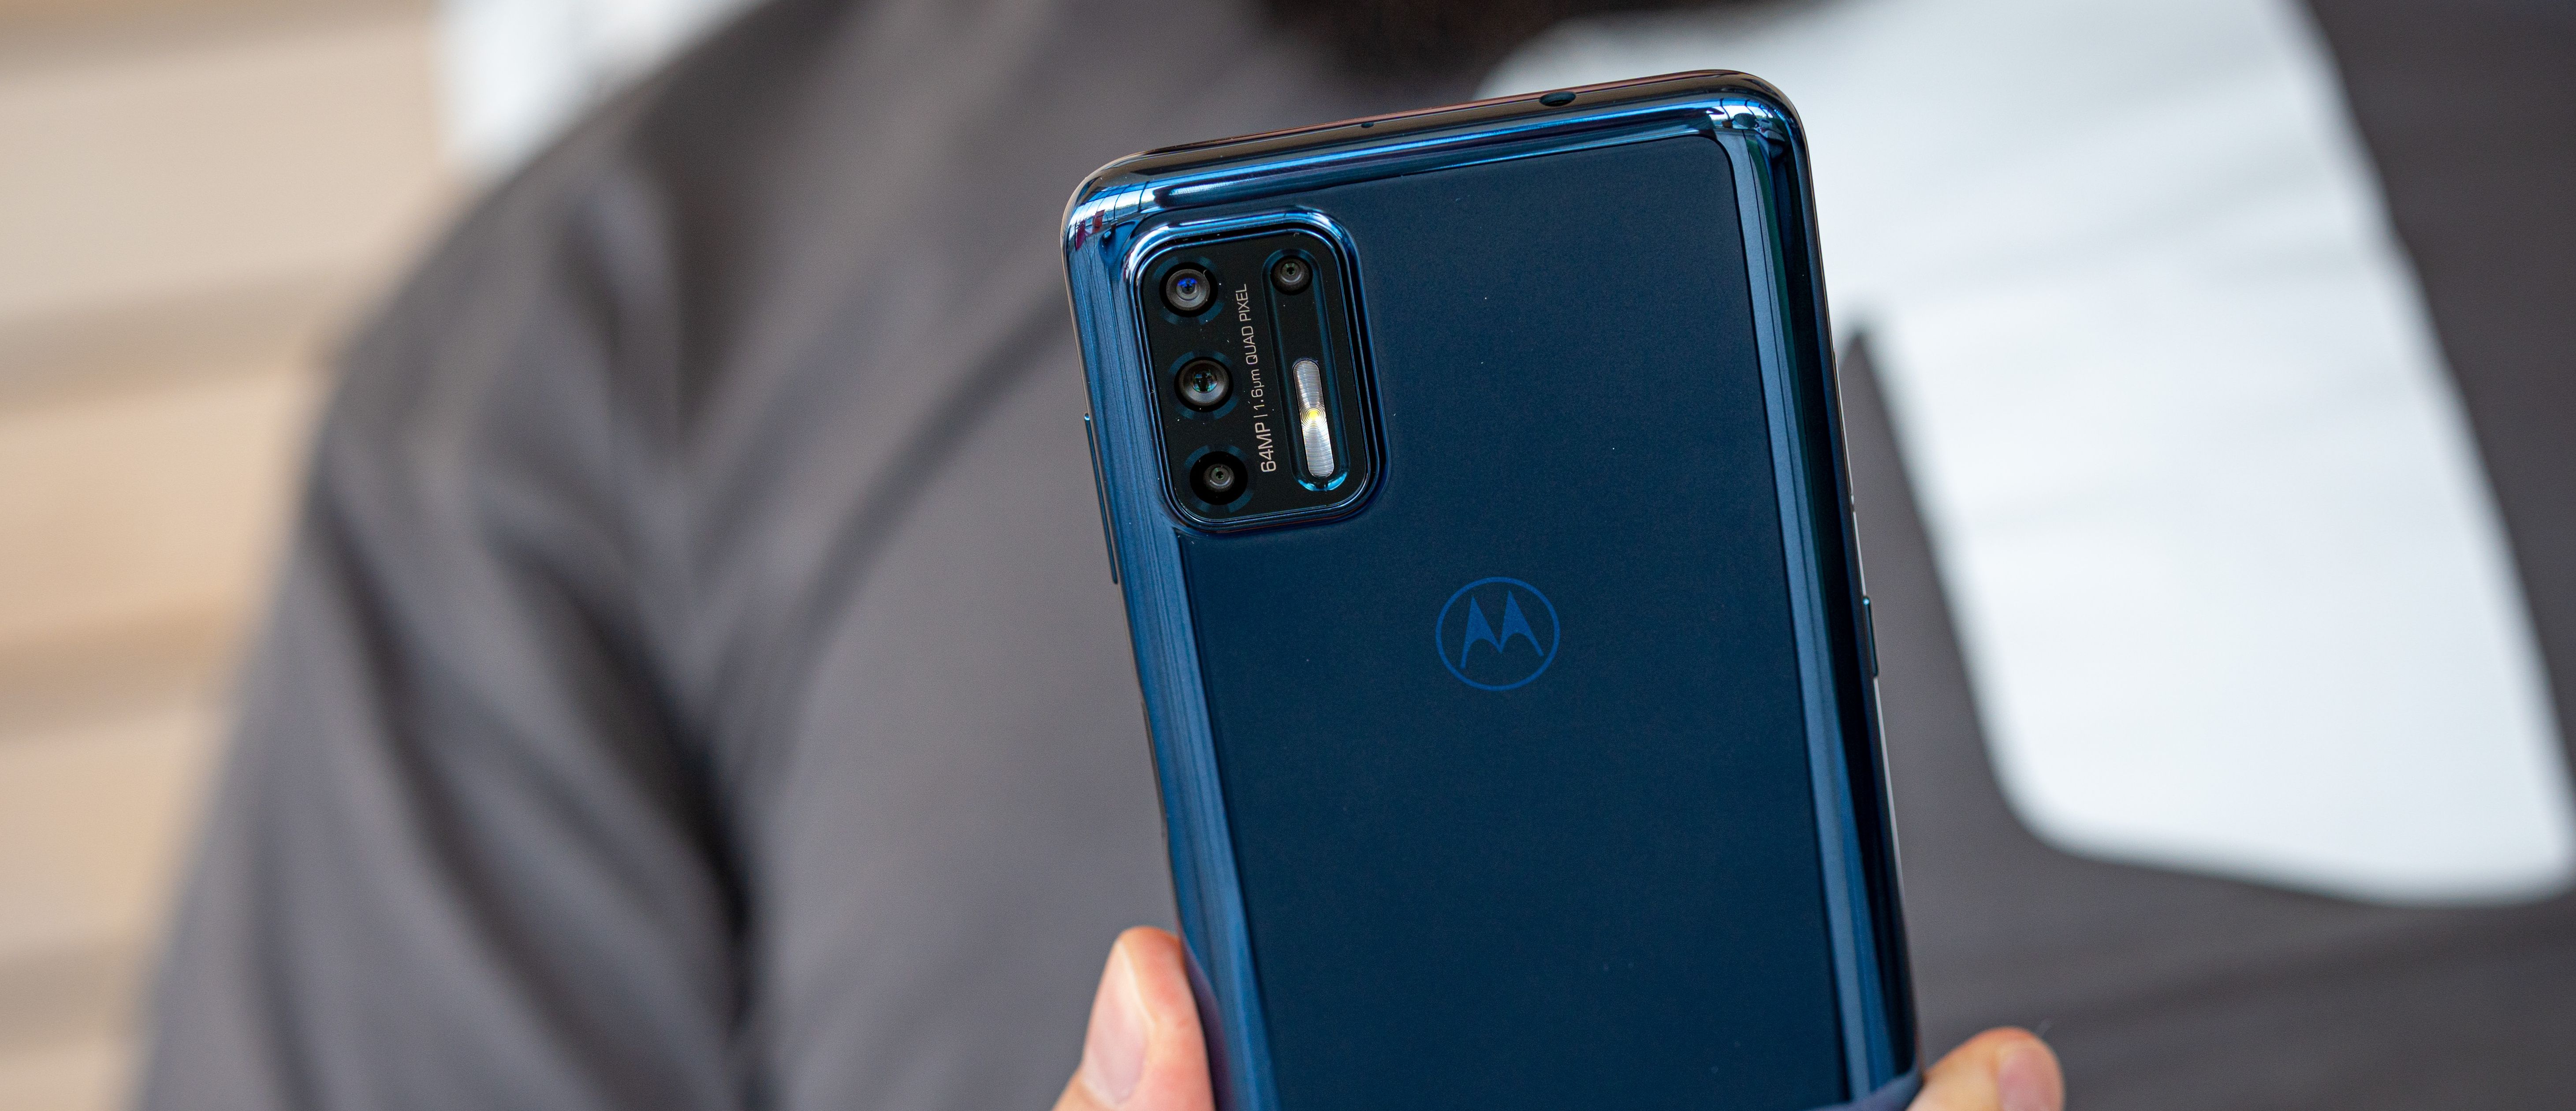 Moto G9 Plus in for review Droid News